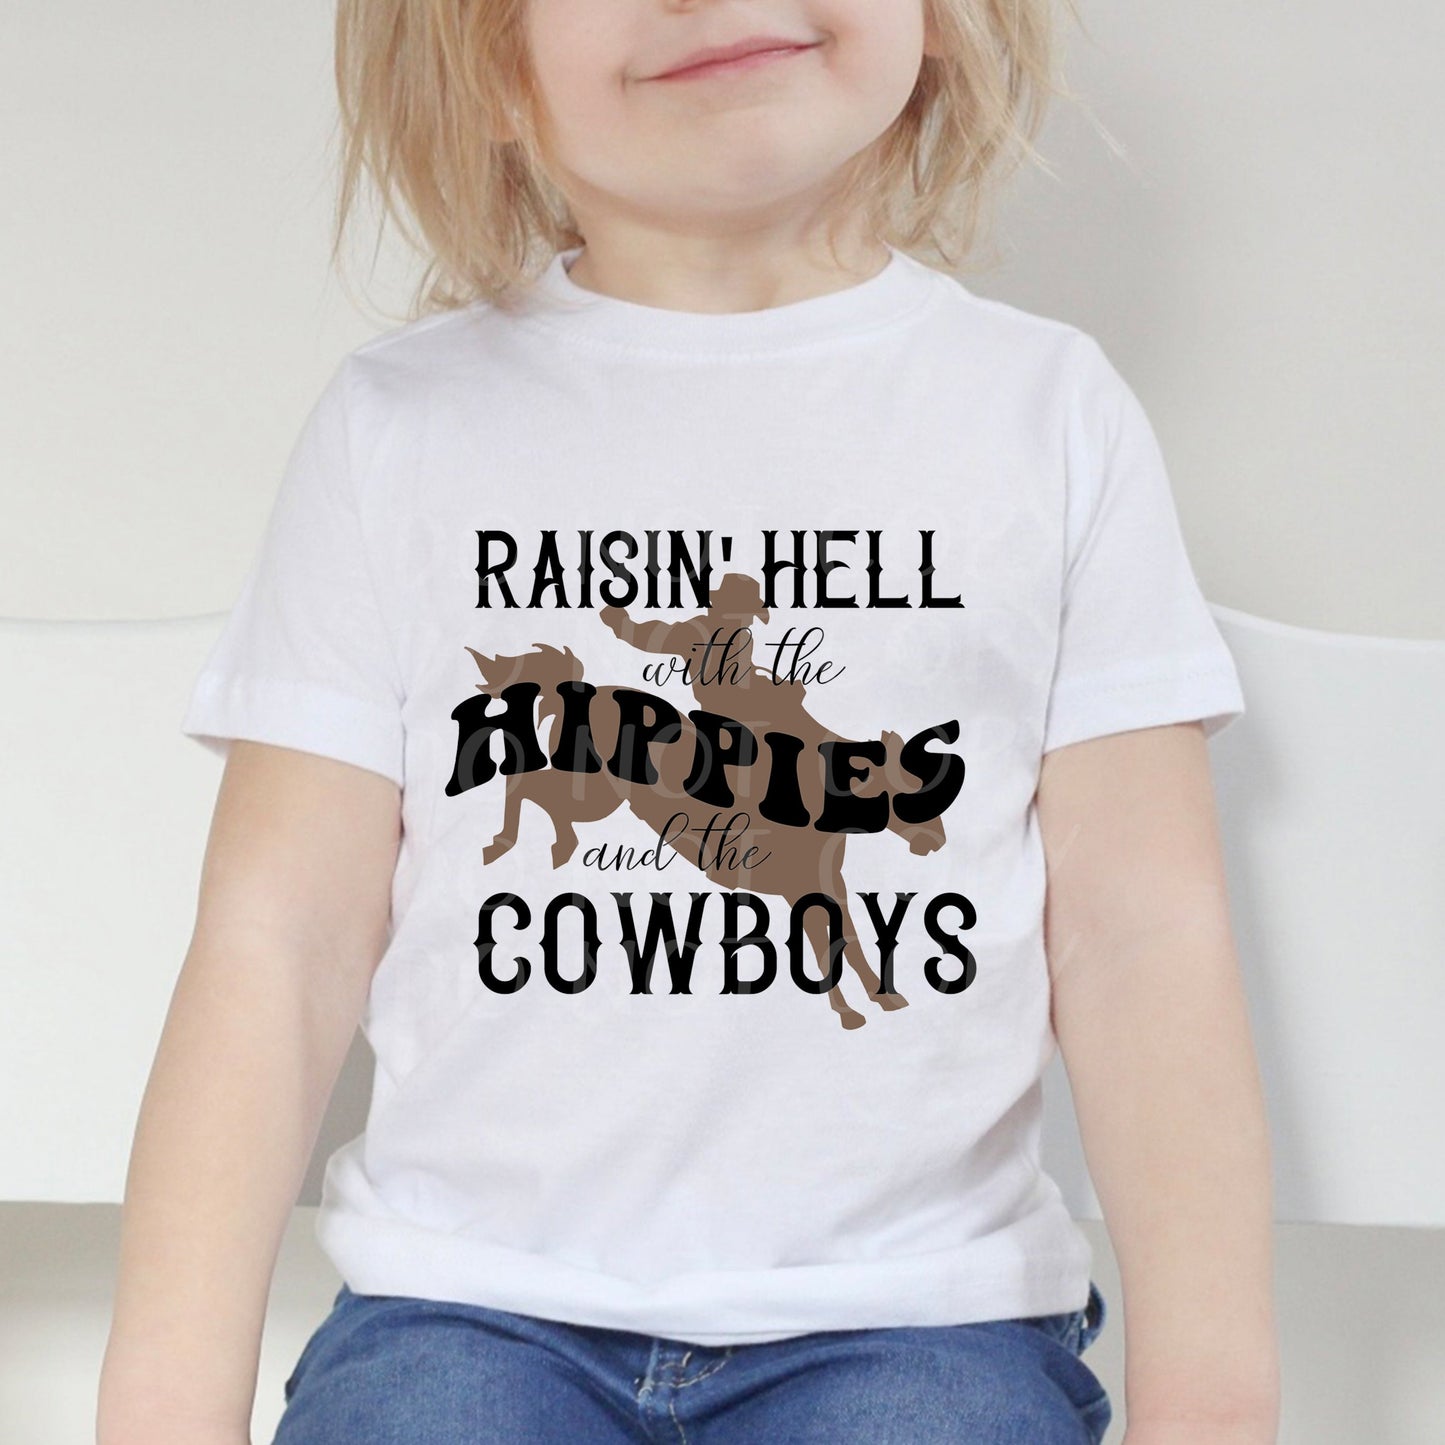 Raisin Hell with Hippies & Cowboys Toddler and Youth Tee - Bella Lia Boutique